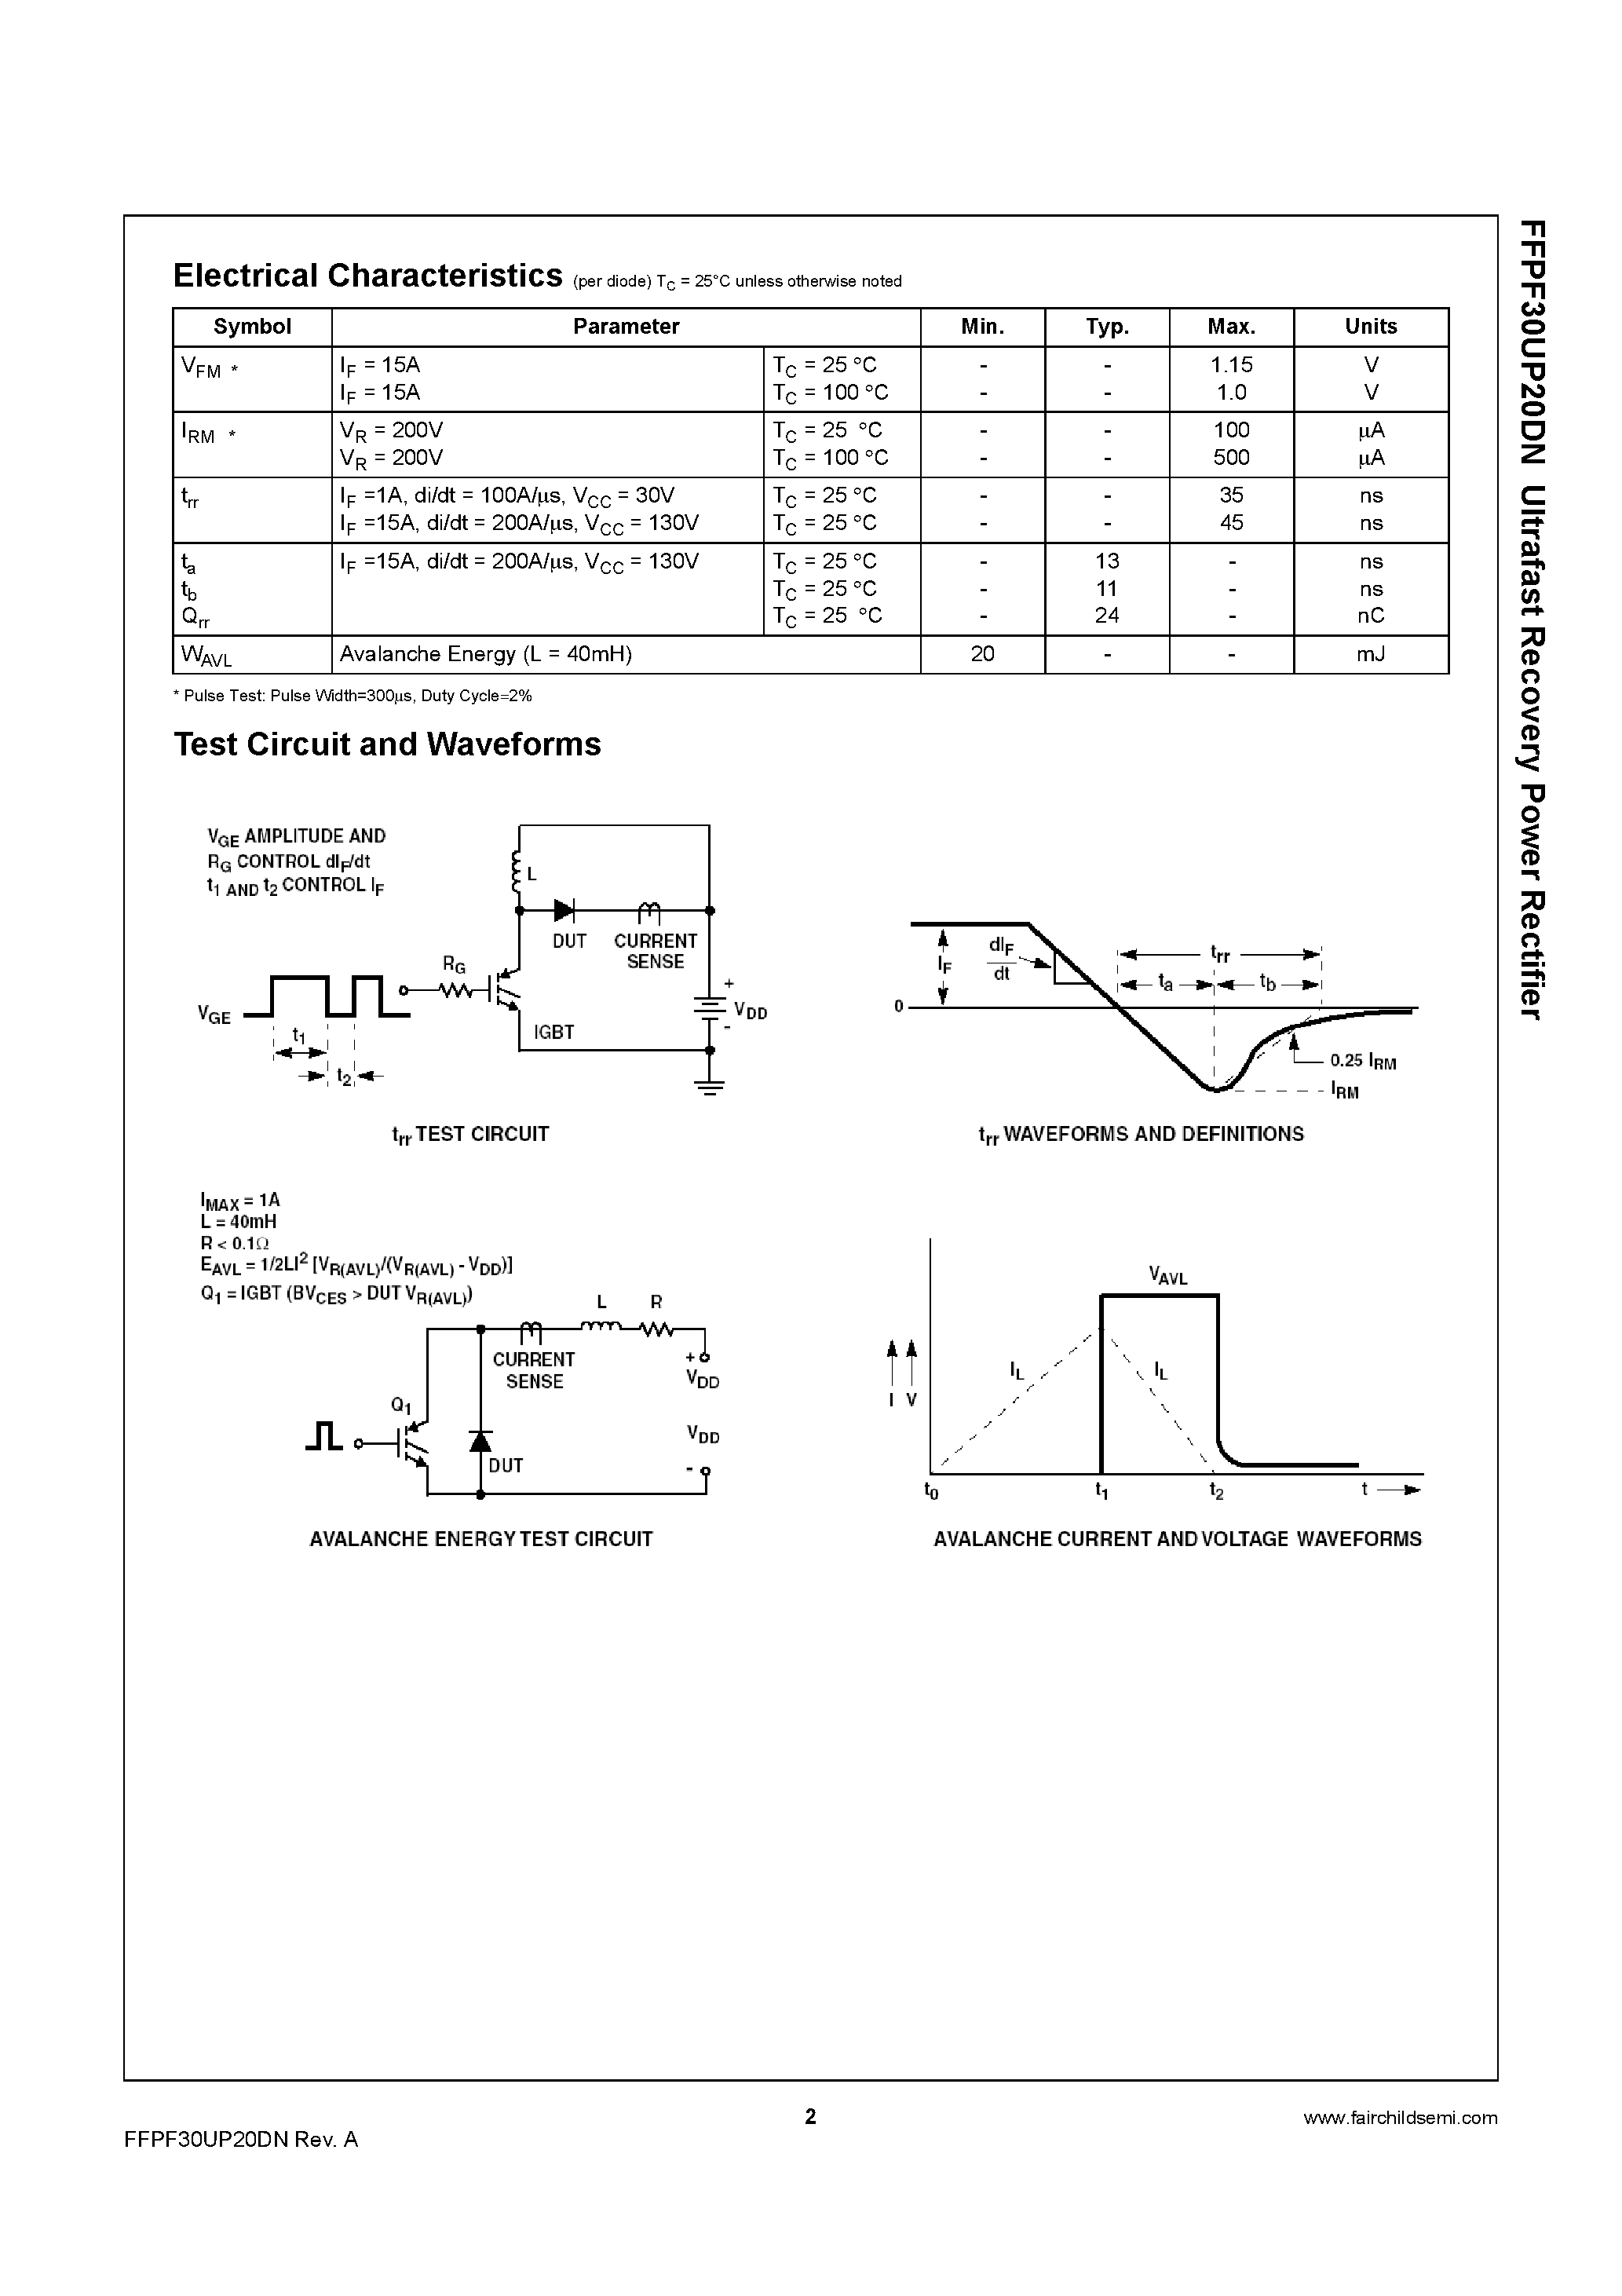 Datasheet FFPF30UP20DN - Ultrafast Recovery Power Rectifier page 2